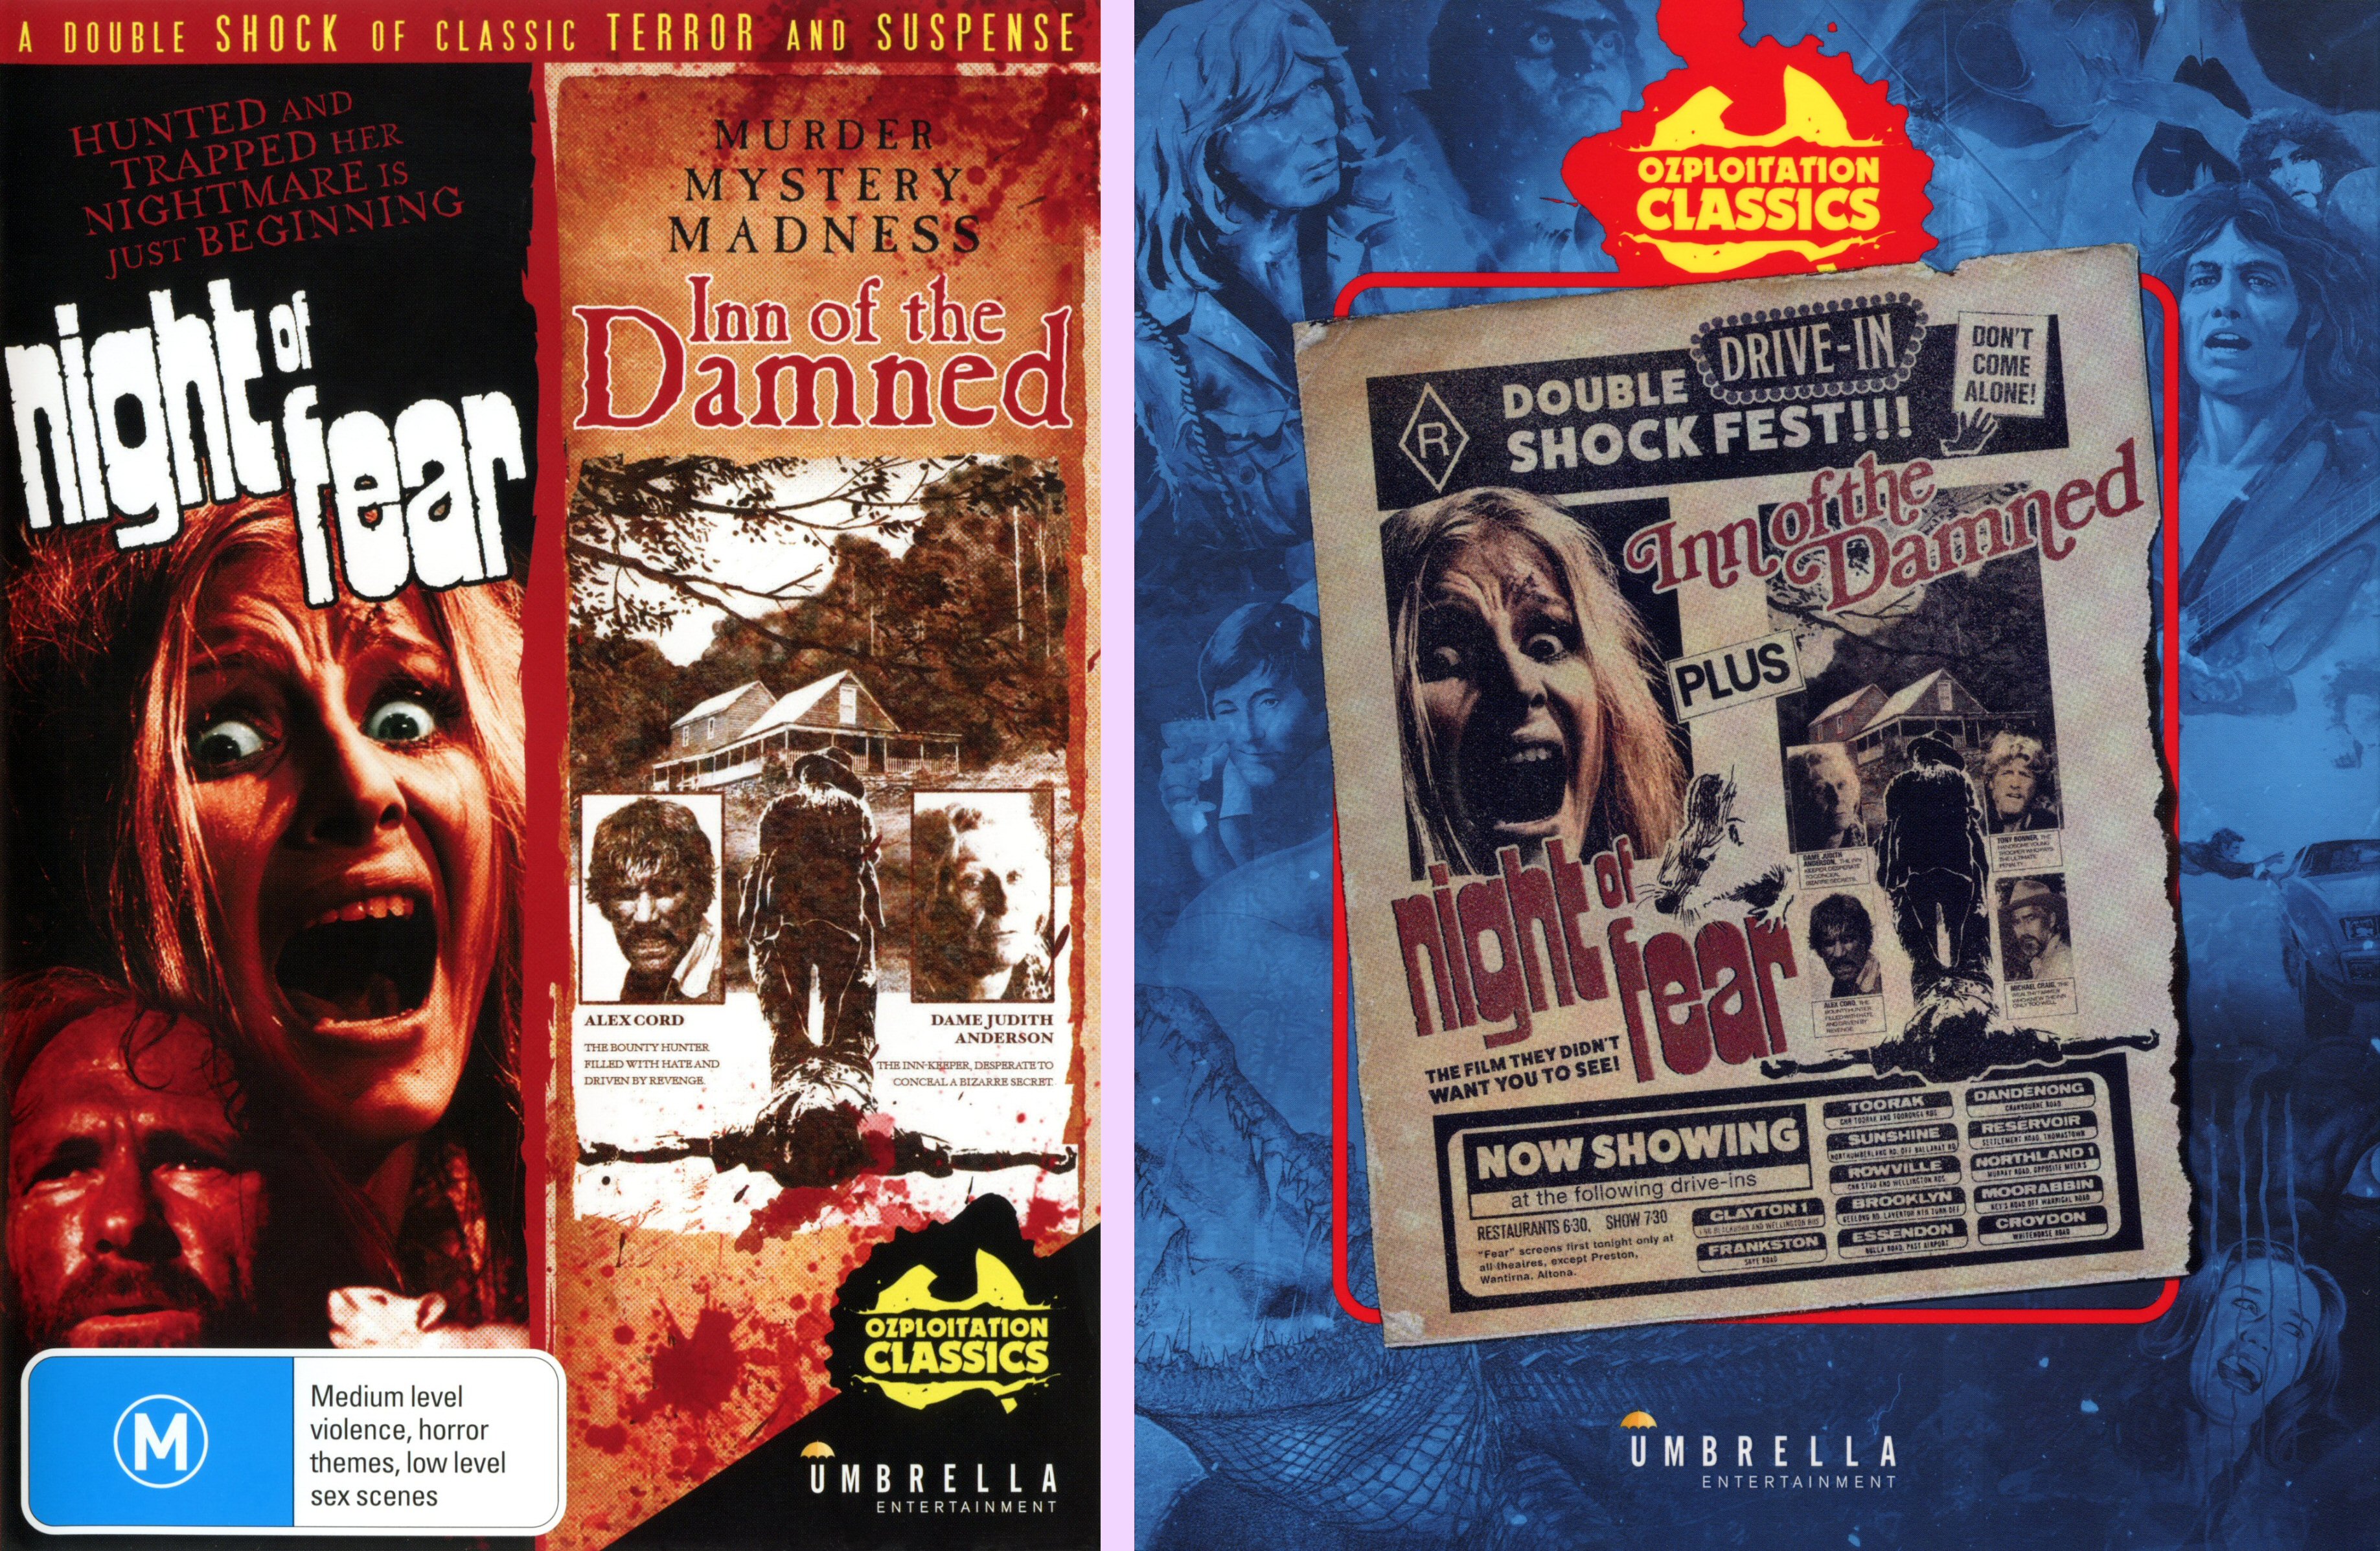 DVD Exotica Ozploitation Classics Inn Of the Damned and Night Of Fear